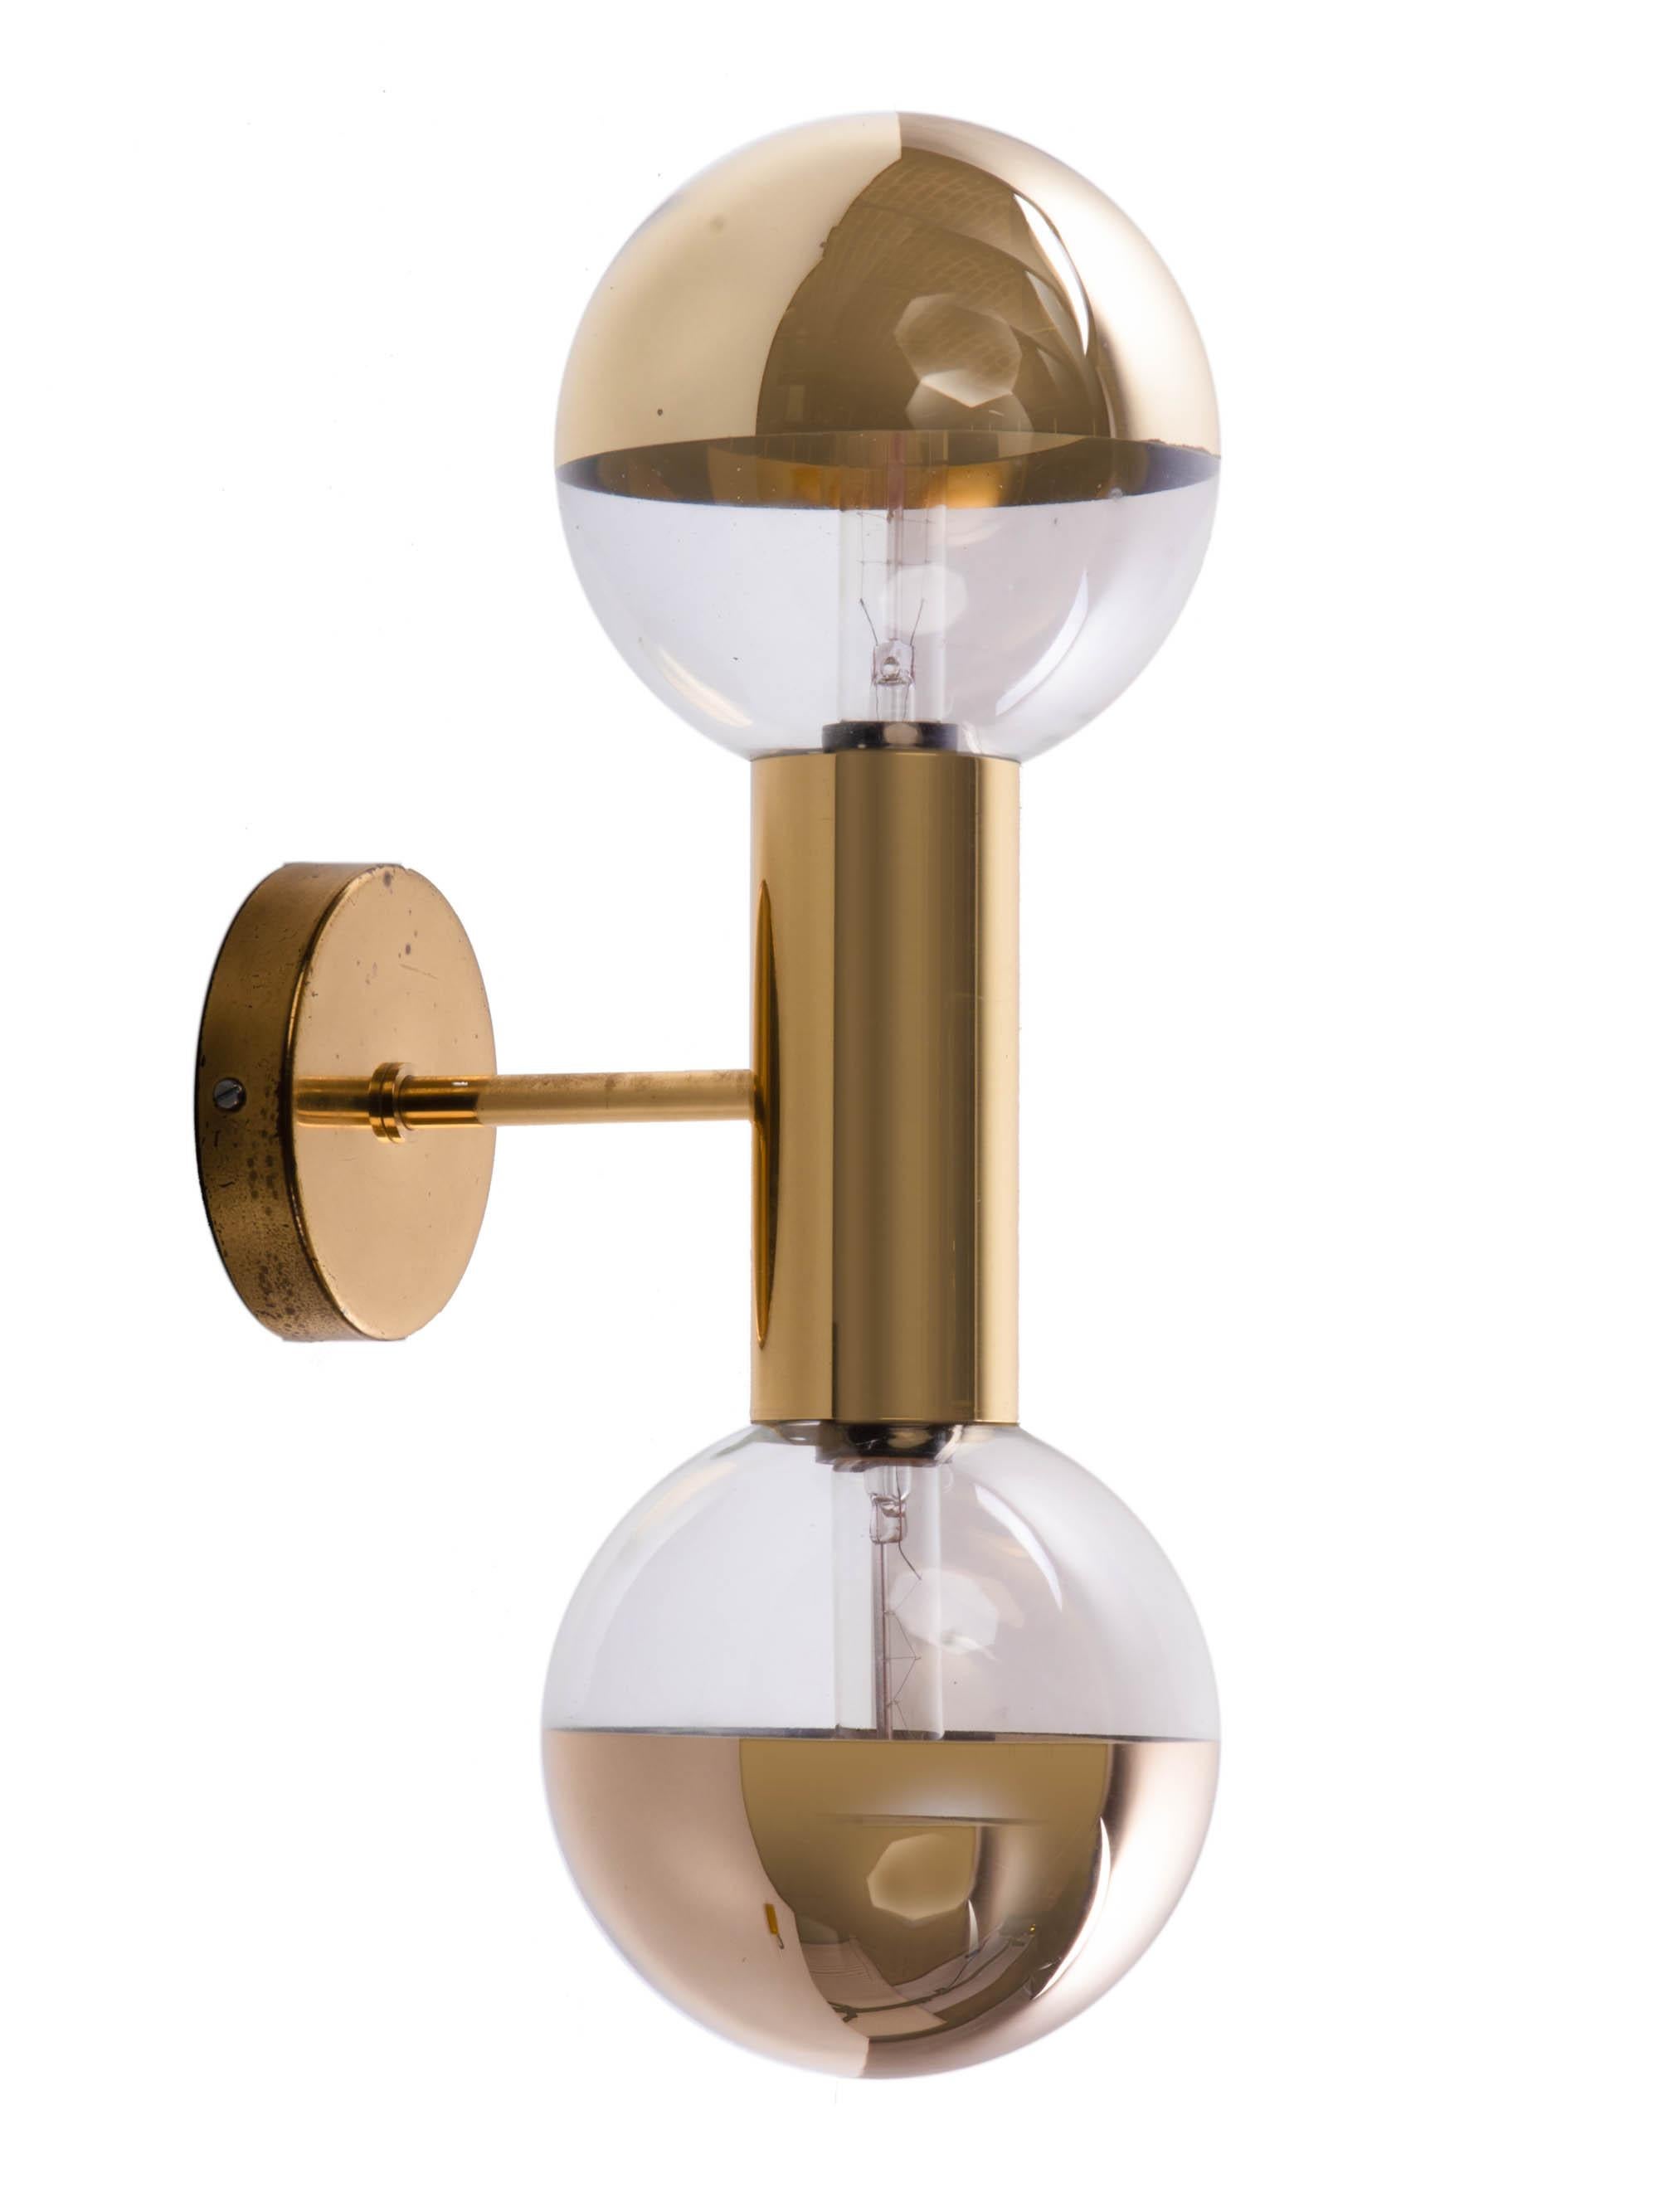 Elegant golden brass and mirrored glass Sputnik wall light. The gold mirrored glass globes are screw mounted to the base. Designed by Motoko Ishii for Staff Lighting, Germany in the 1970s. 

Measures: 14.5